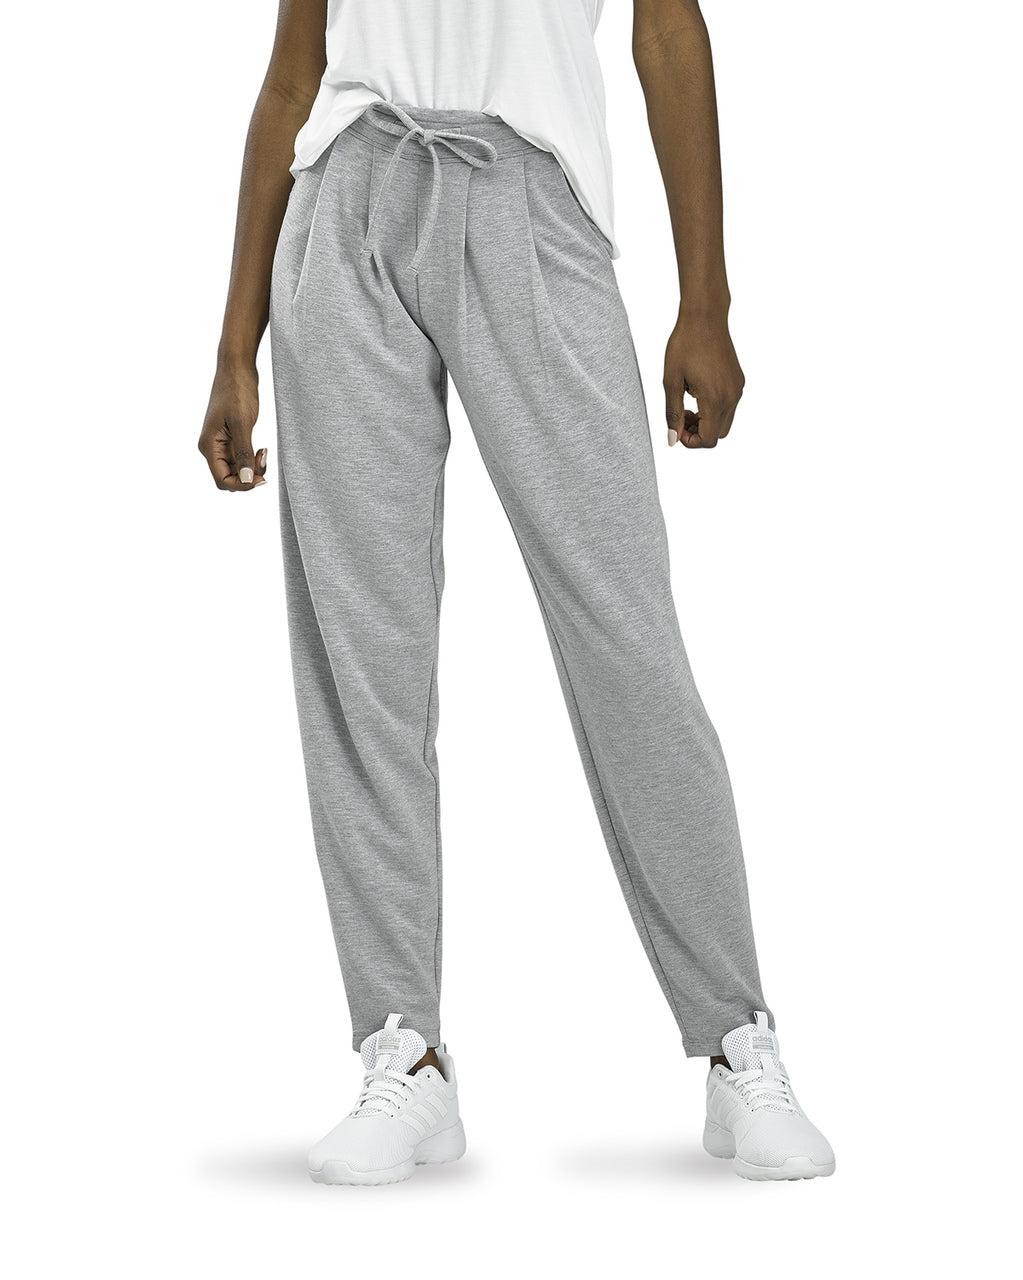 Wearever You Are Relaxed Jogger Pants